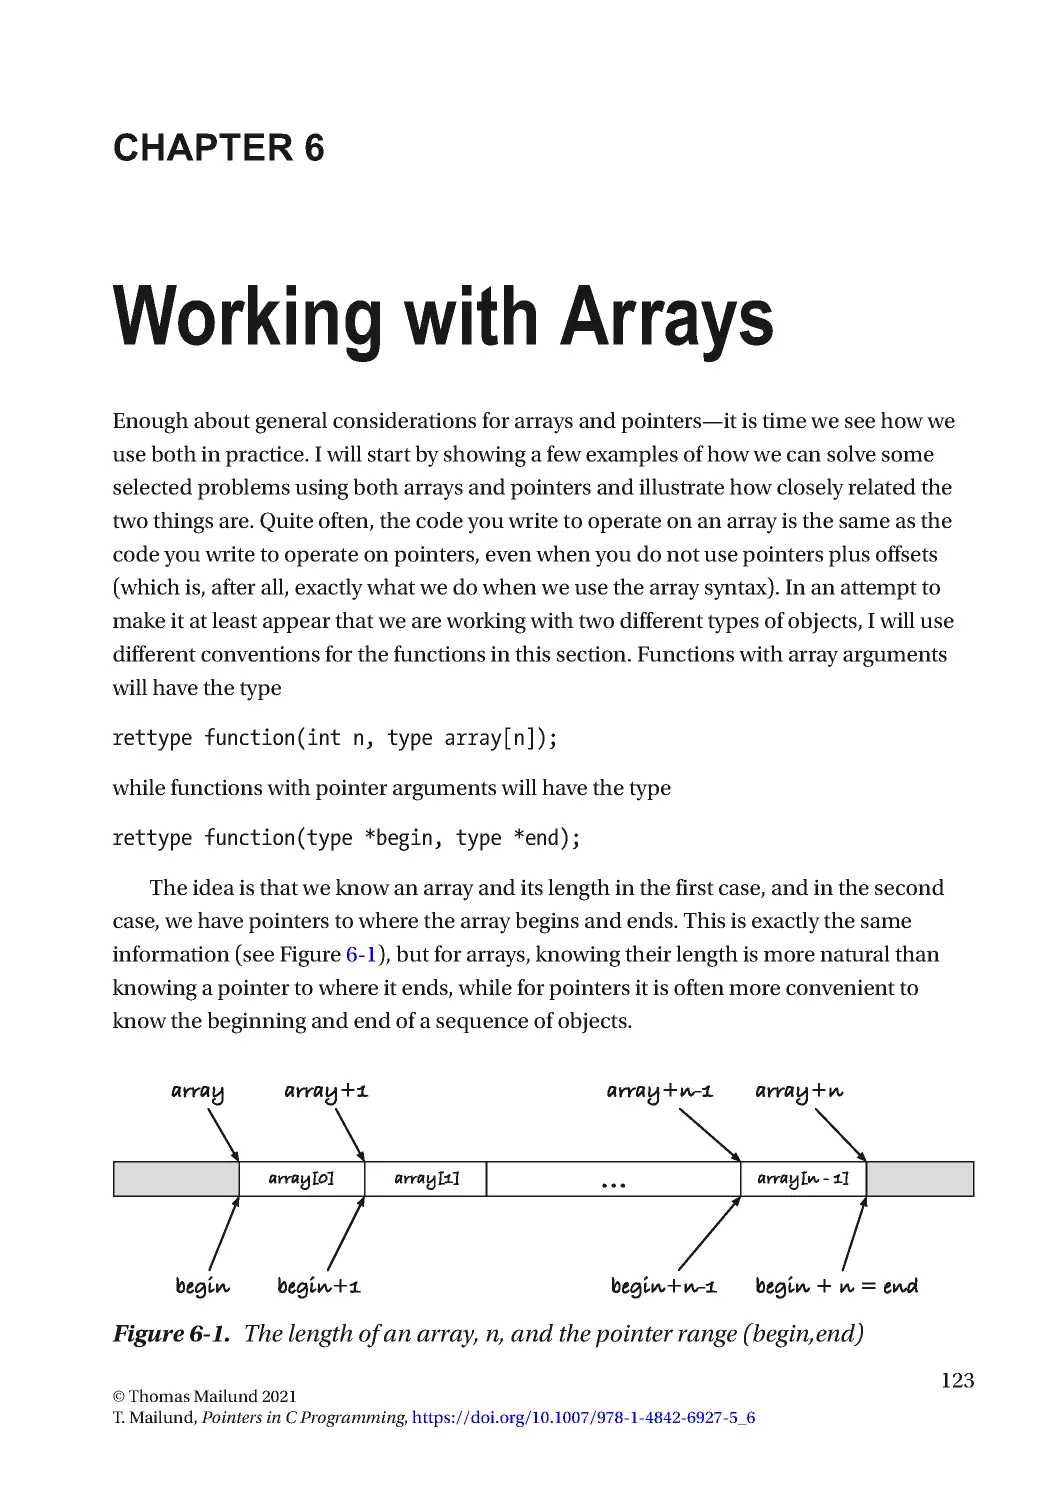 Chapter 6: Working with Arrays